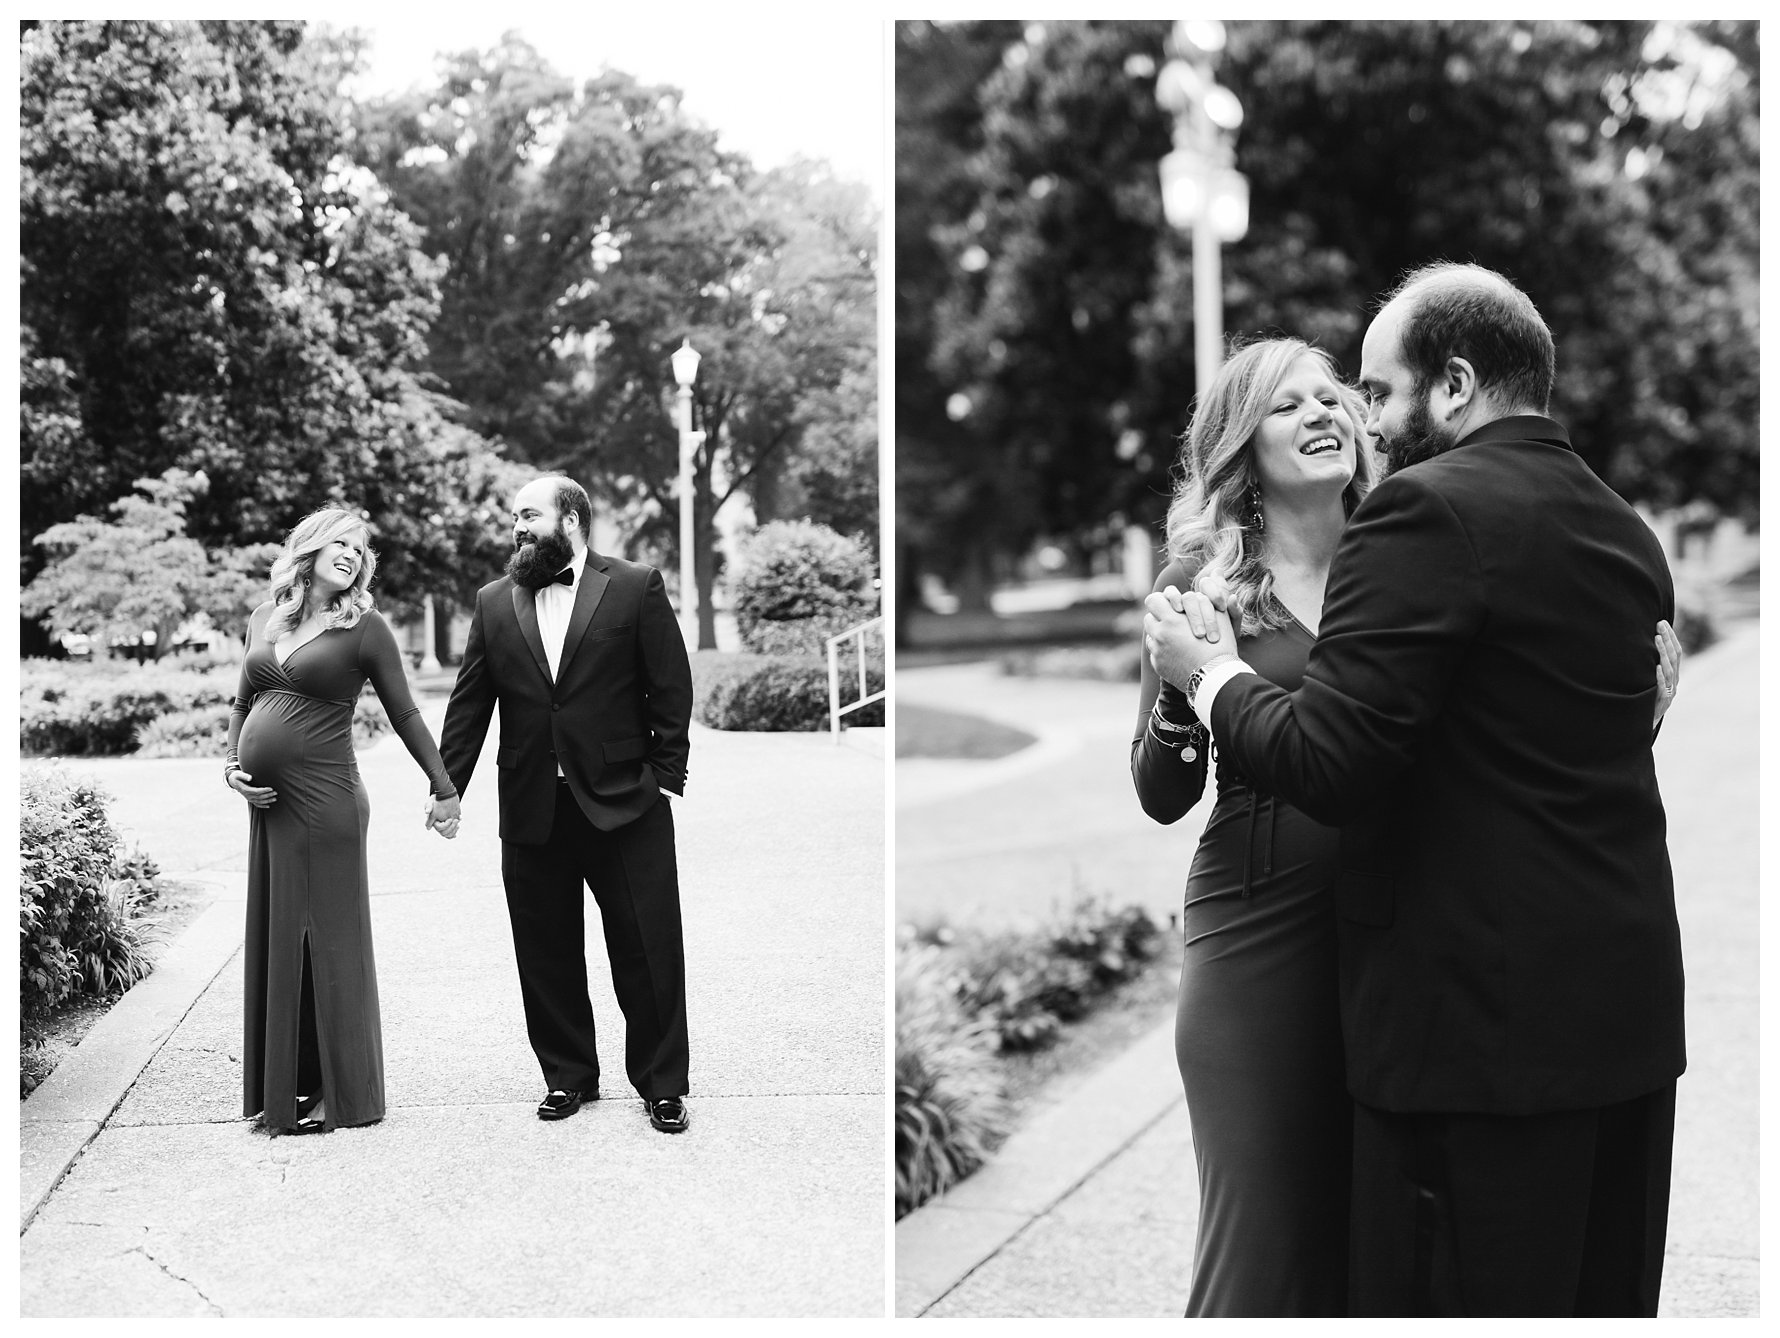 Raleigh_NC_Formal_Maternity_Photography_Blue_Black_Tie_0011